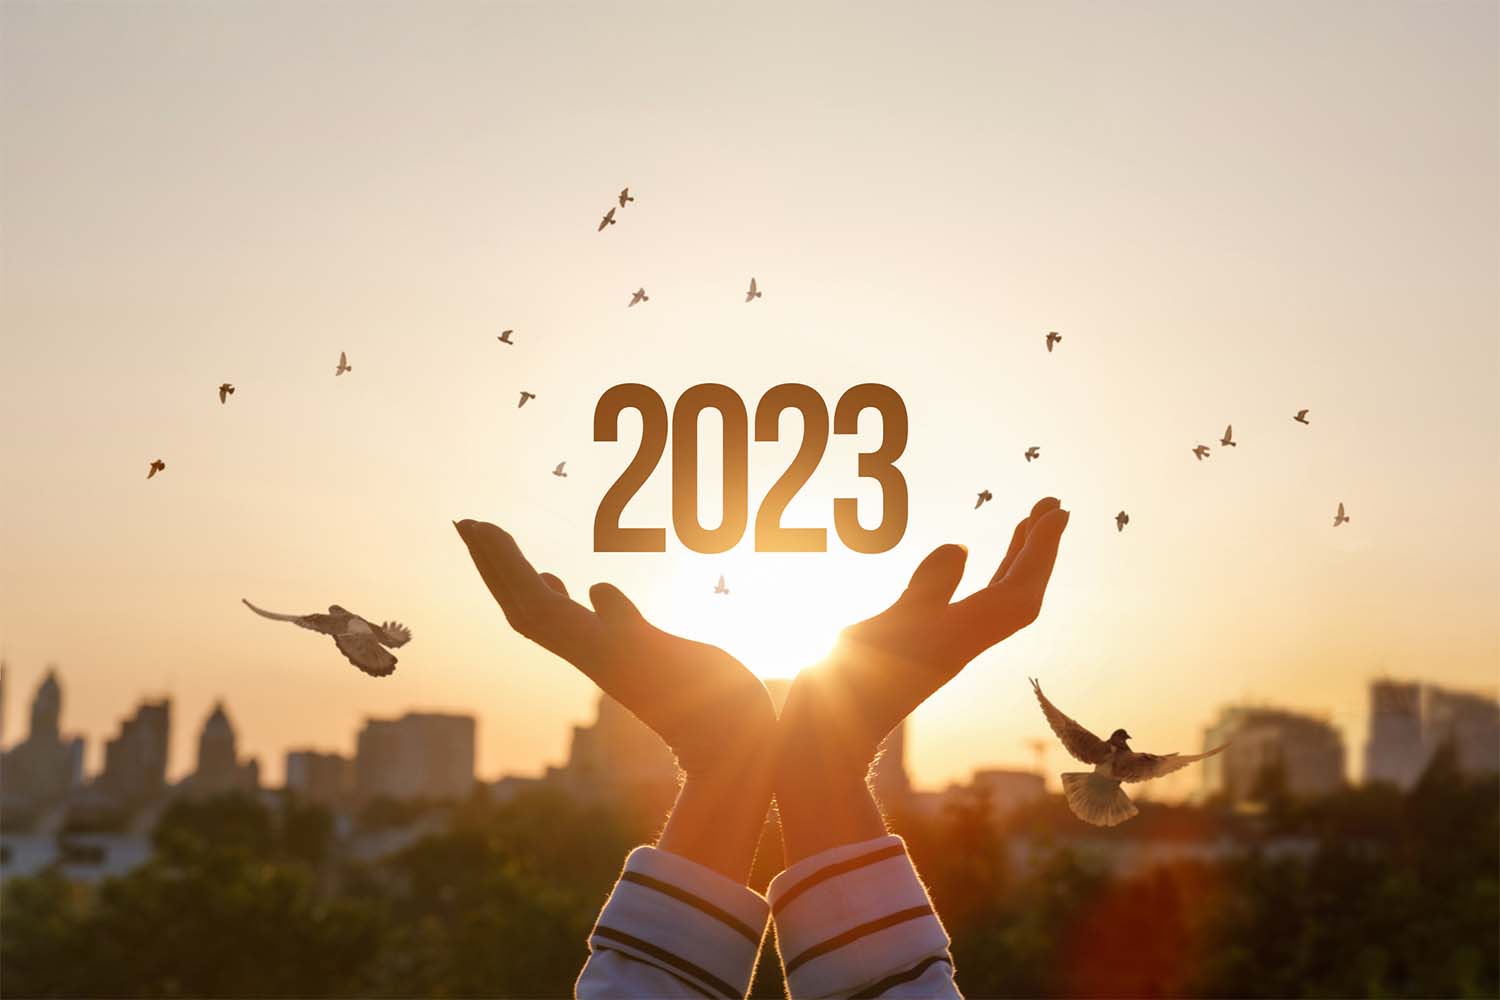 Top of mind: How will 2023 look like?